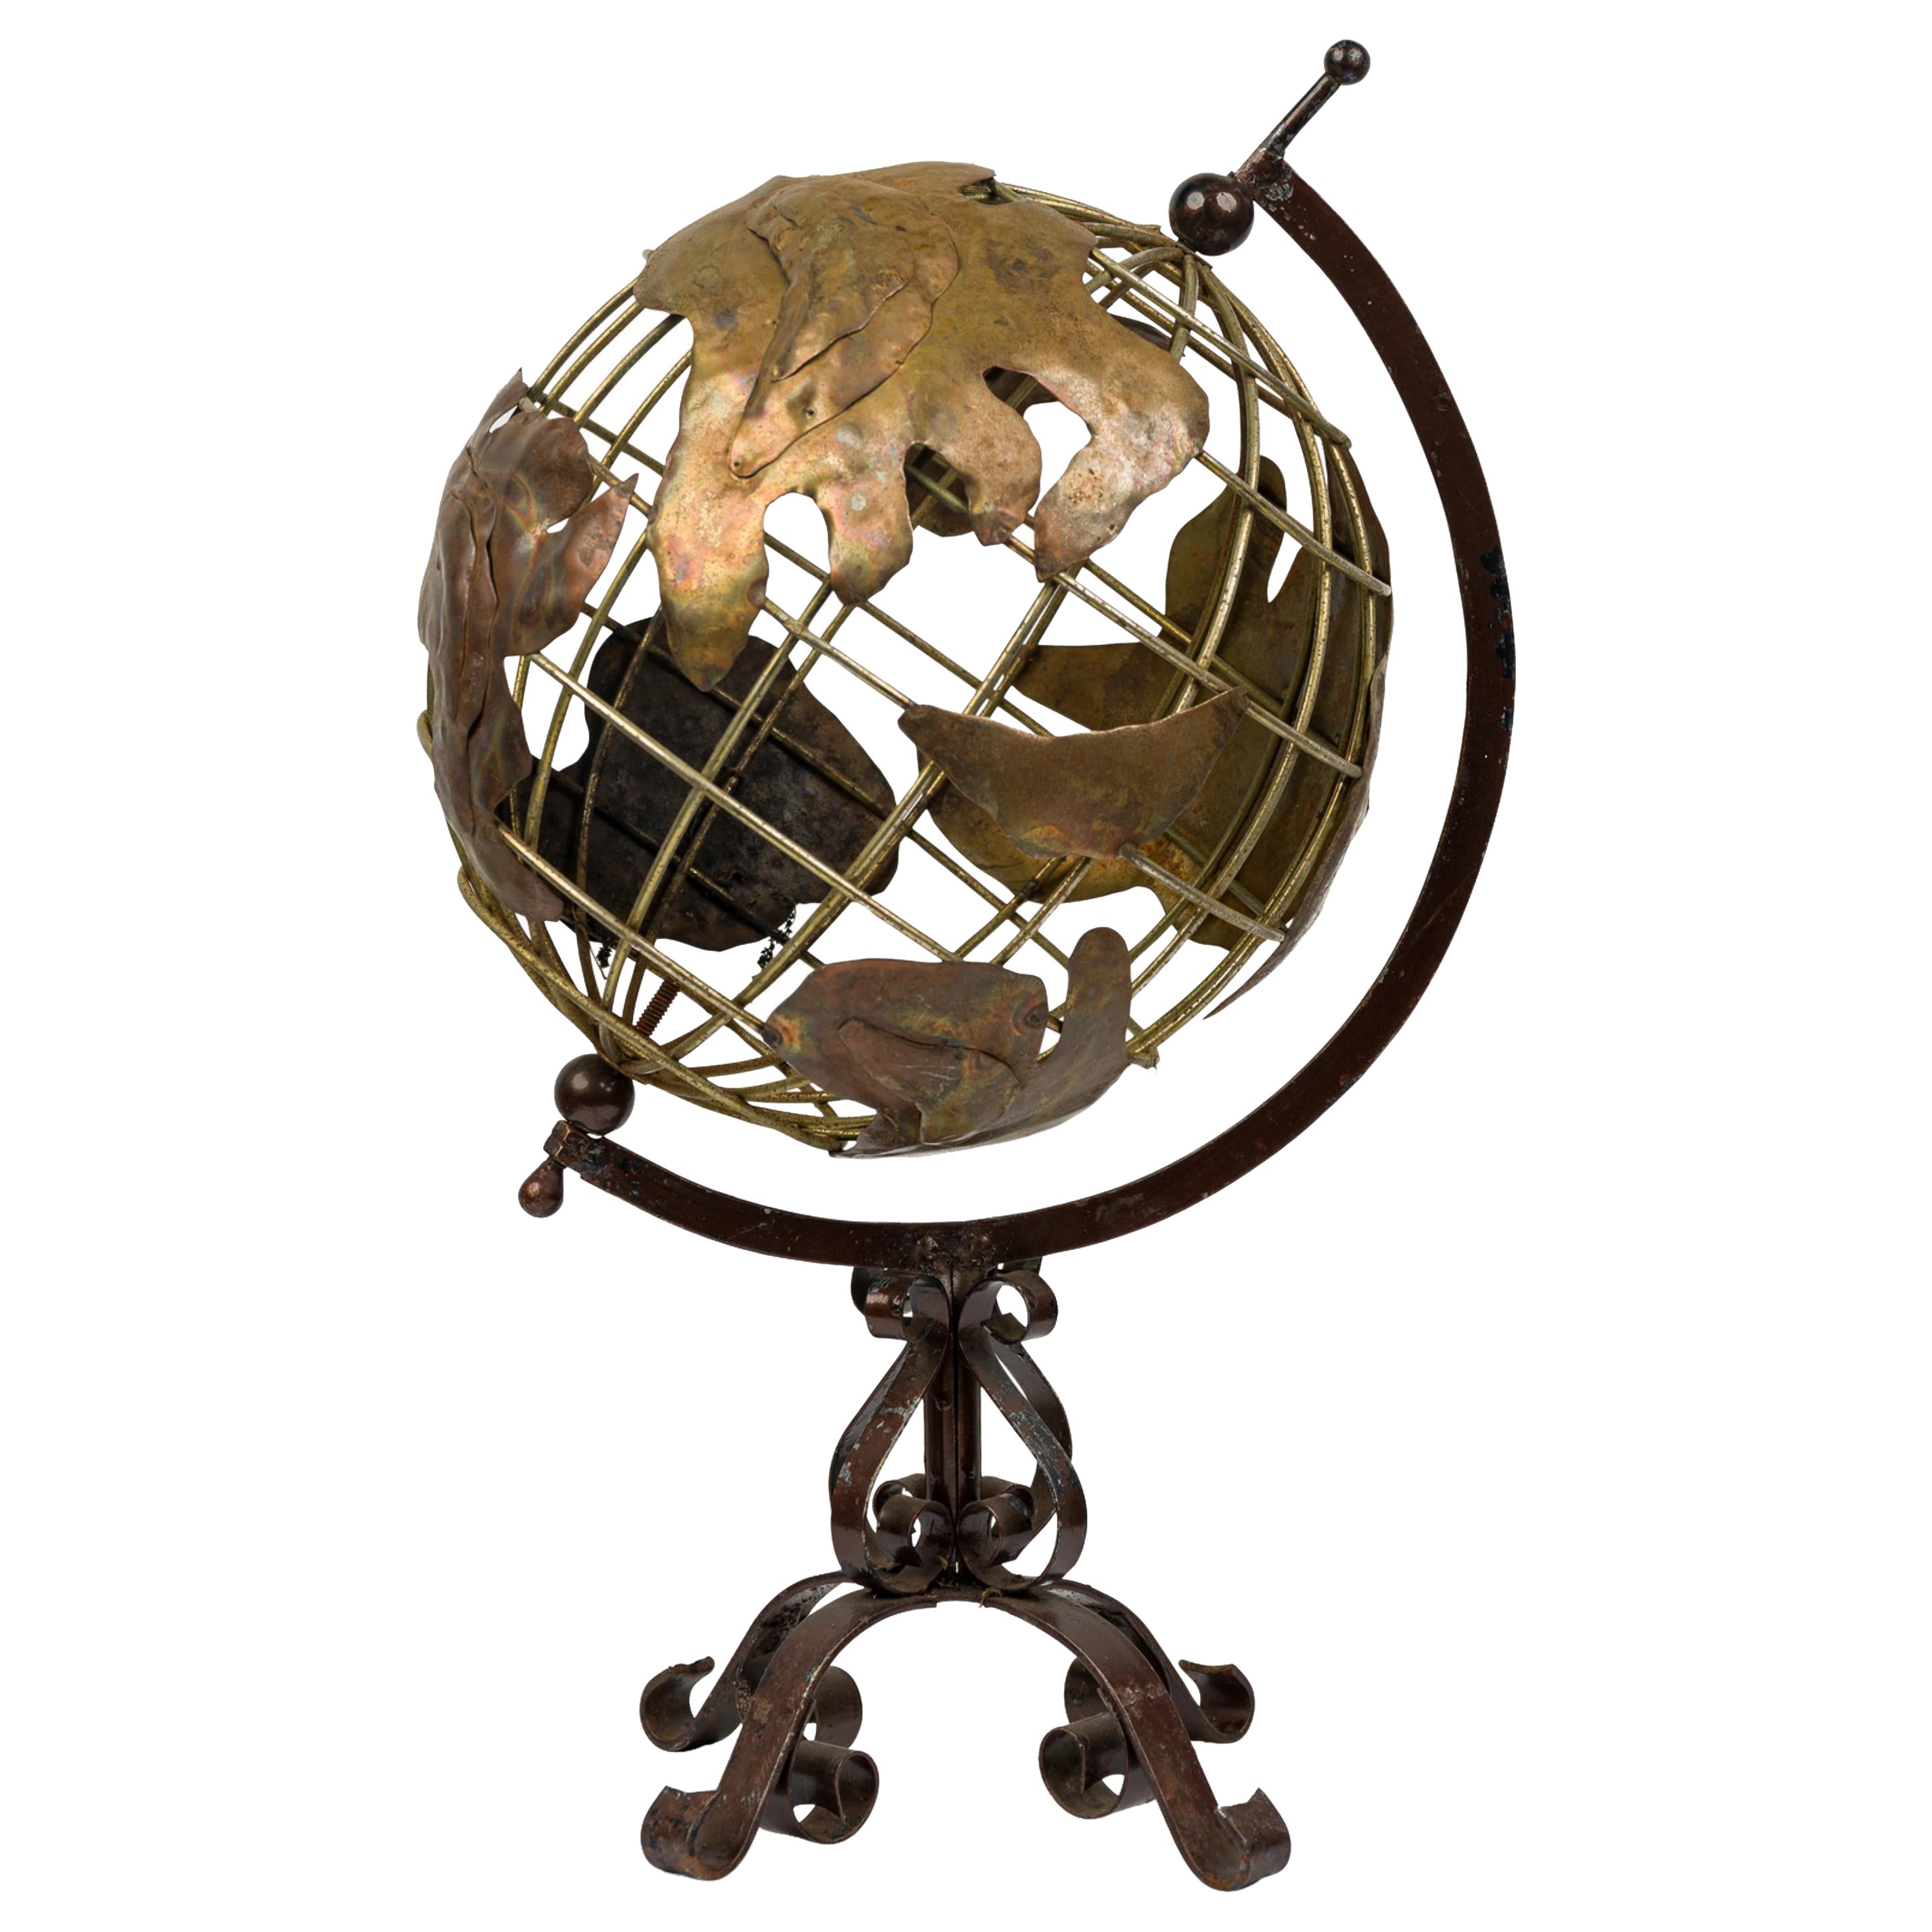 Contemporary American Rotating Metal Globe on Stand